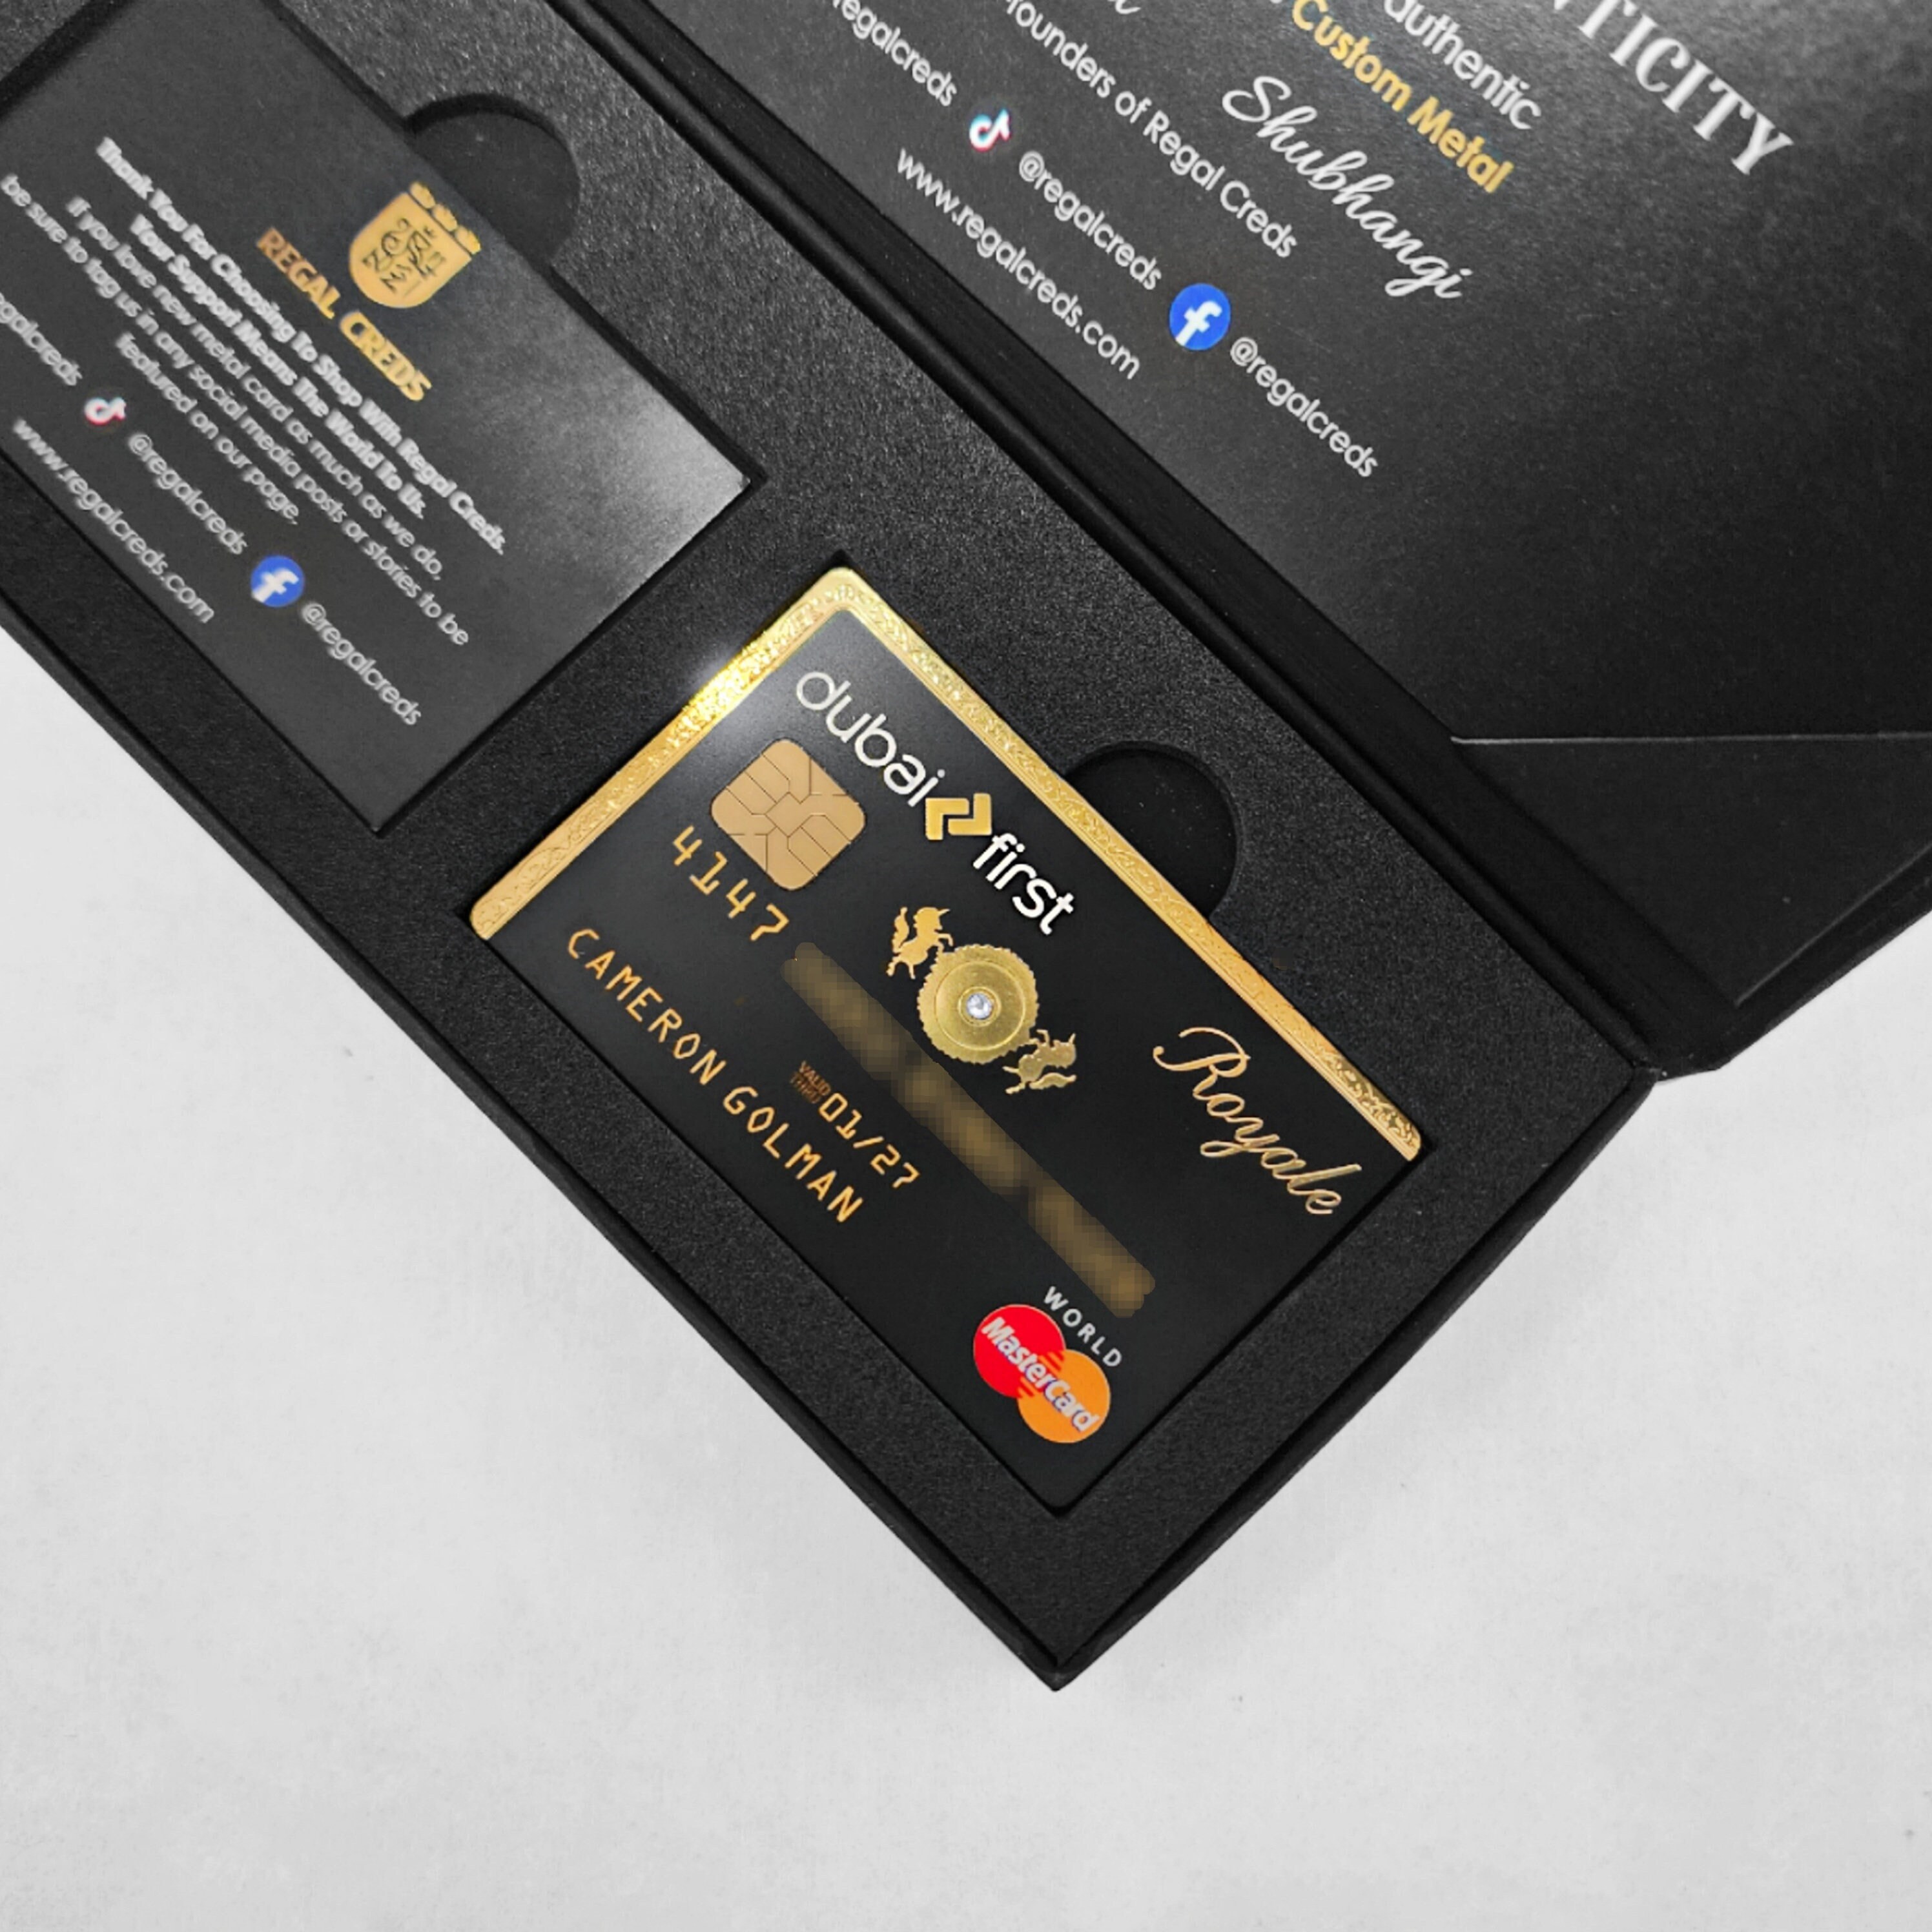 Metal-CreditCard - Is a plastic credit card really you? No. You deserve  better! Upgrade any plastic debit or credit card to 100% metal. No Annuals  Fees. No Applications. - the big banks